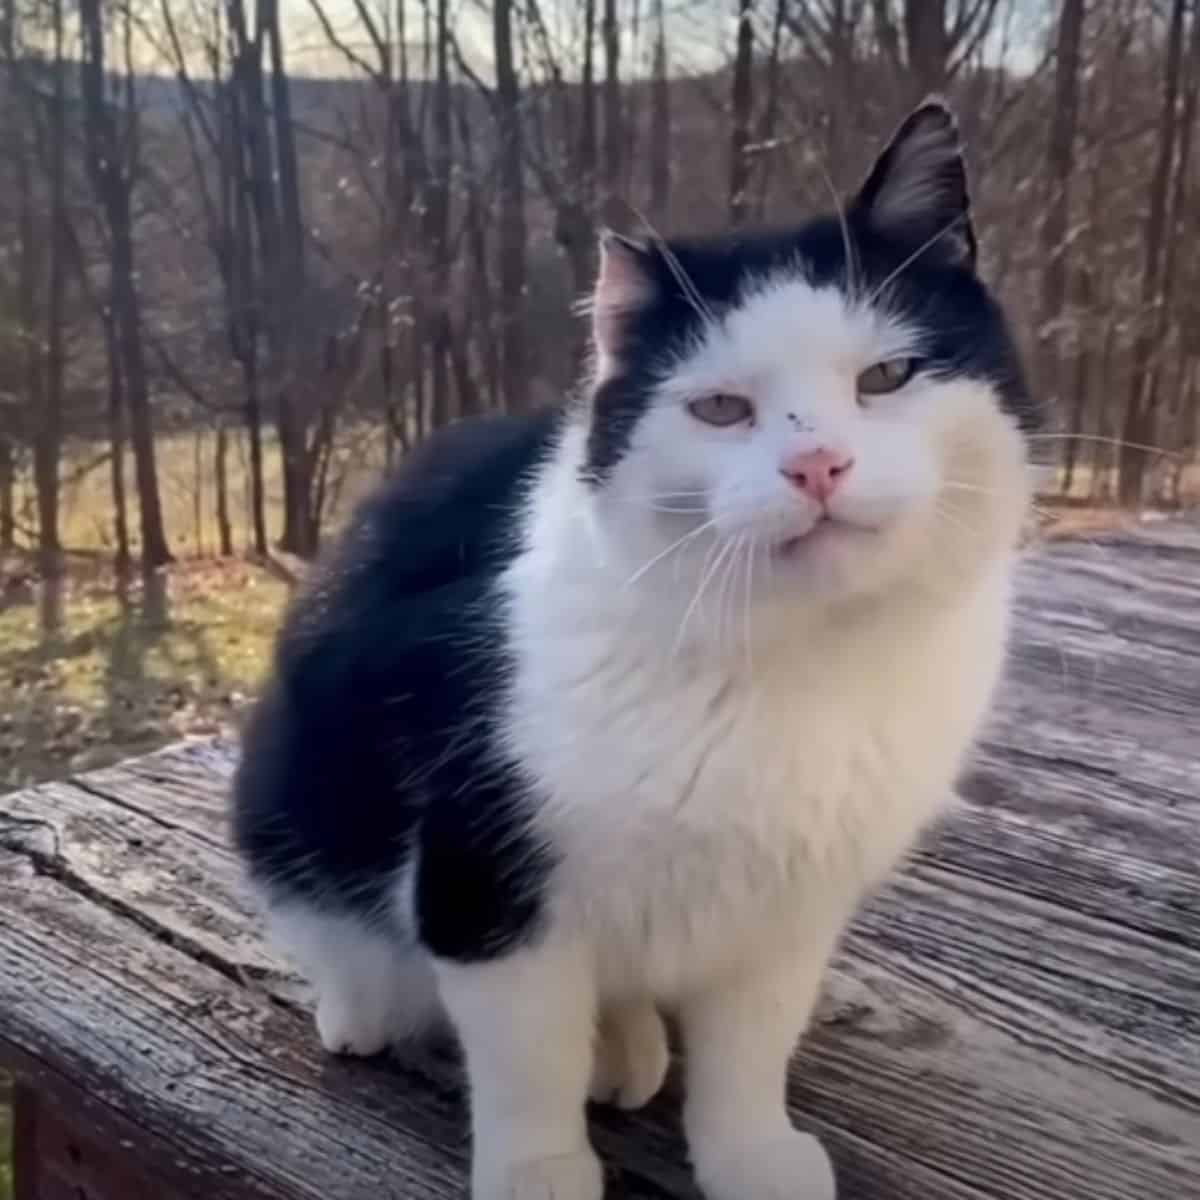 a black and white cat sits on a wooden table and looks at the camera